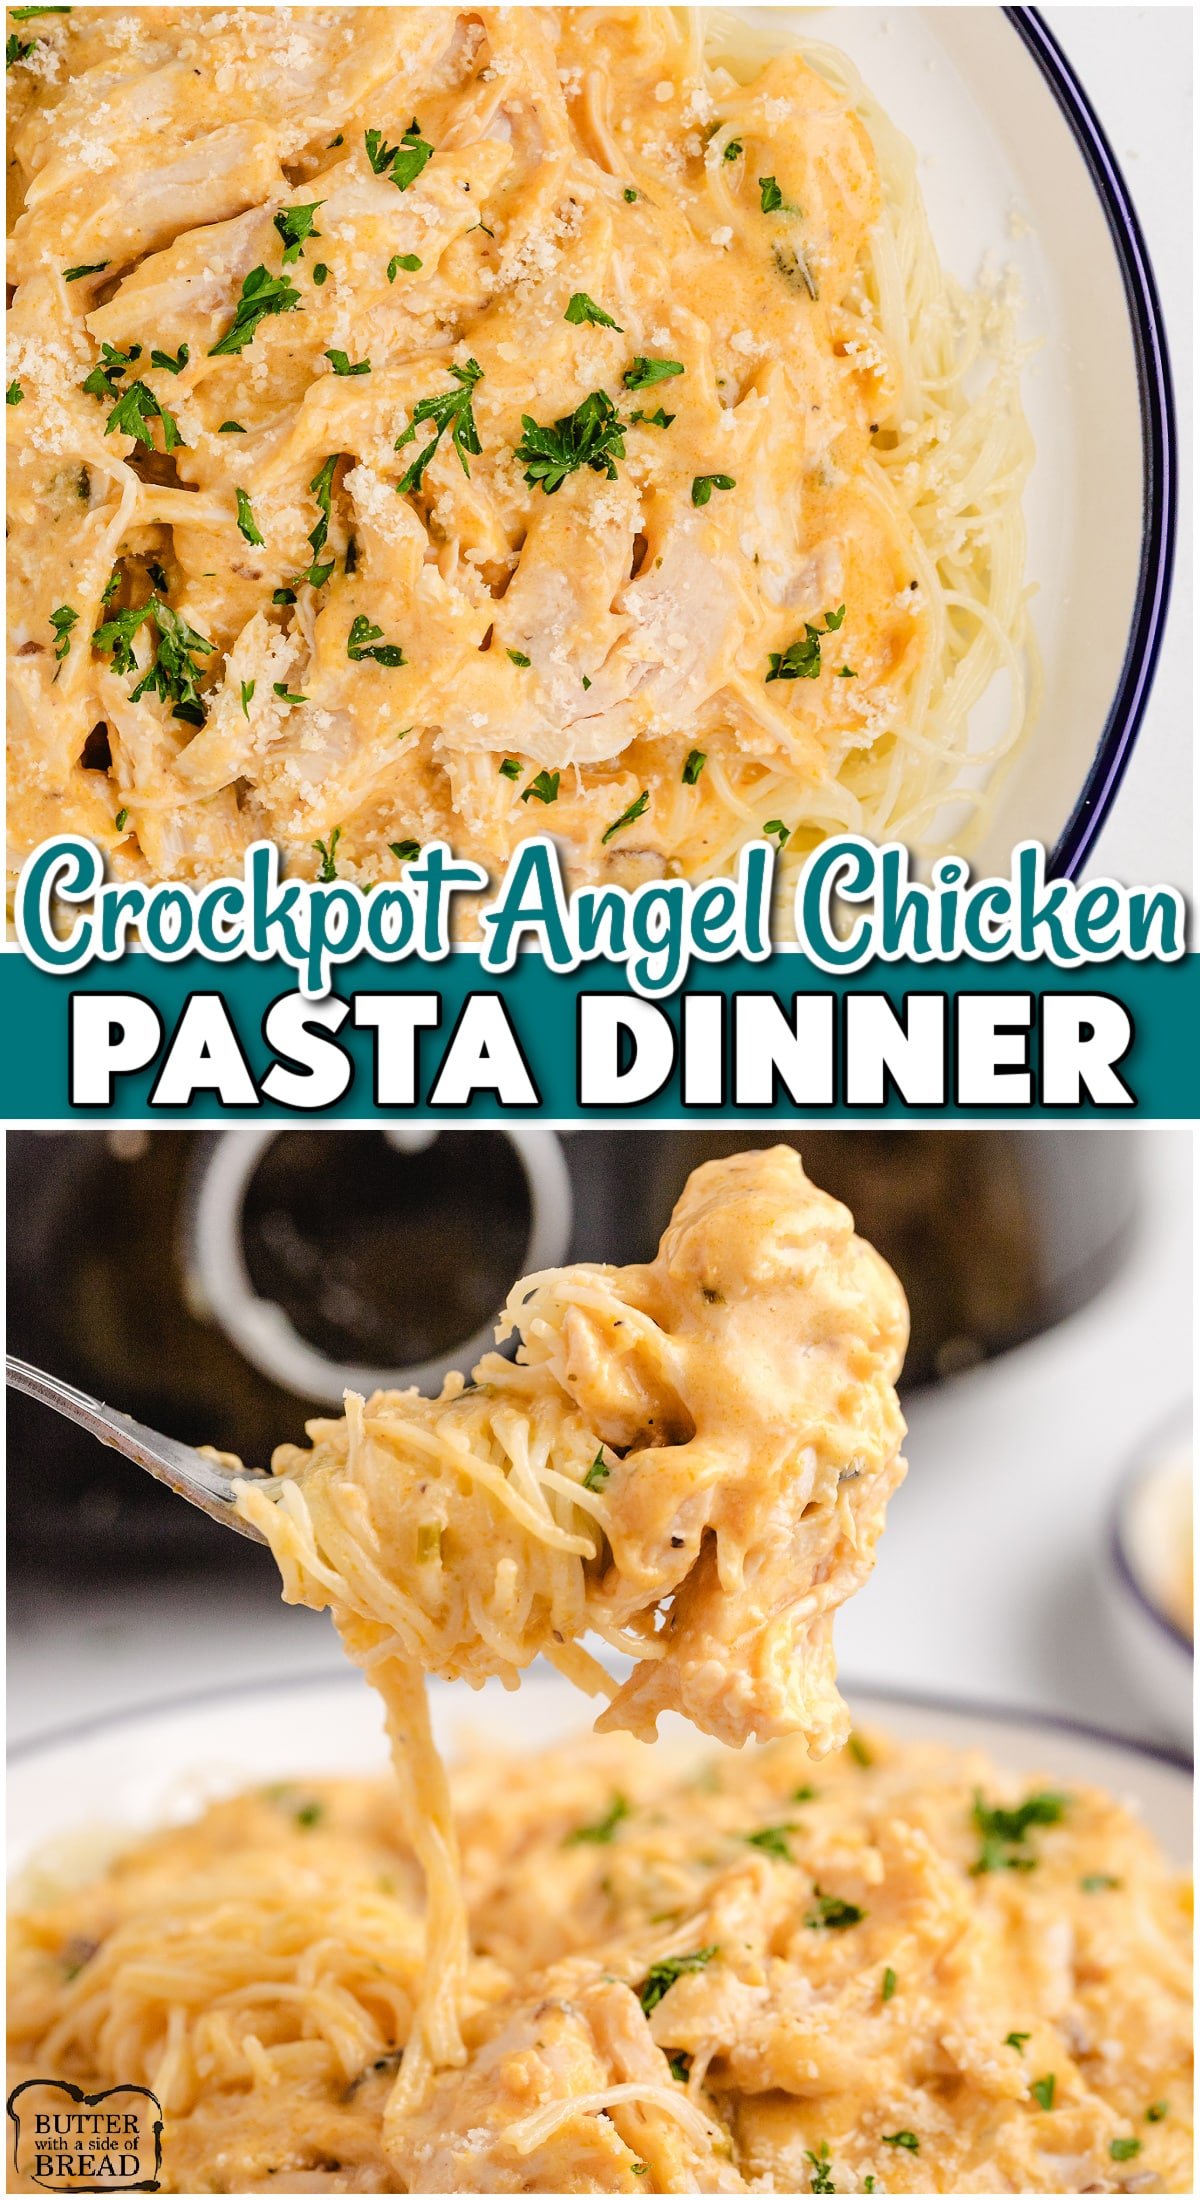 Angel Chicken Pasta is a creamy, flavorful chicken dinner that's made in the crockpot & served on Angel hair pasta. This creamy chicken pasta calls for minimal ingredients & is a simple, delicious meal!